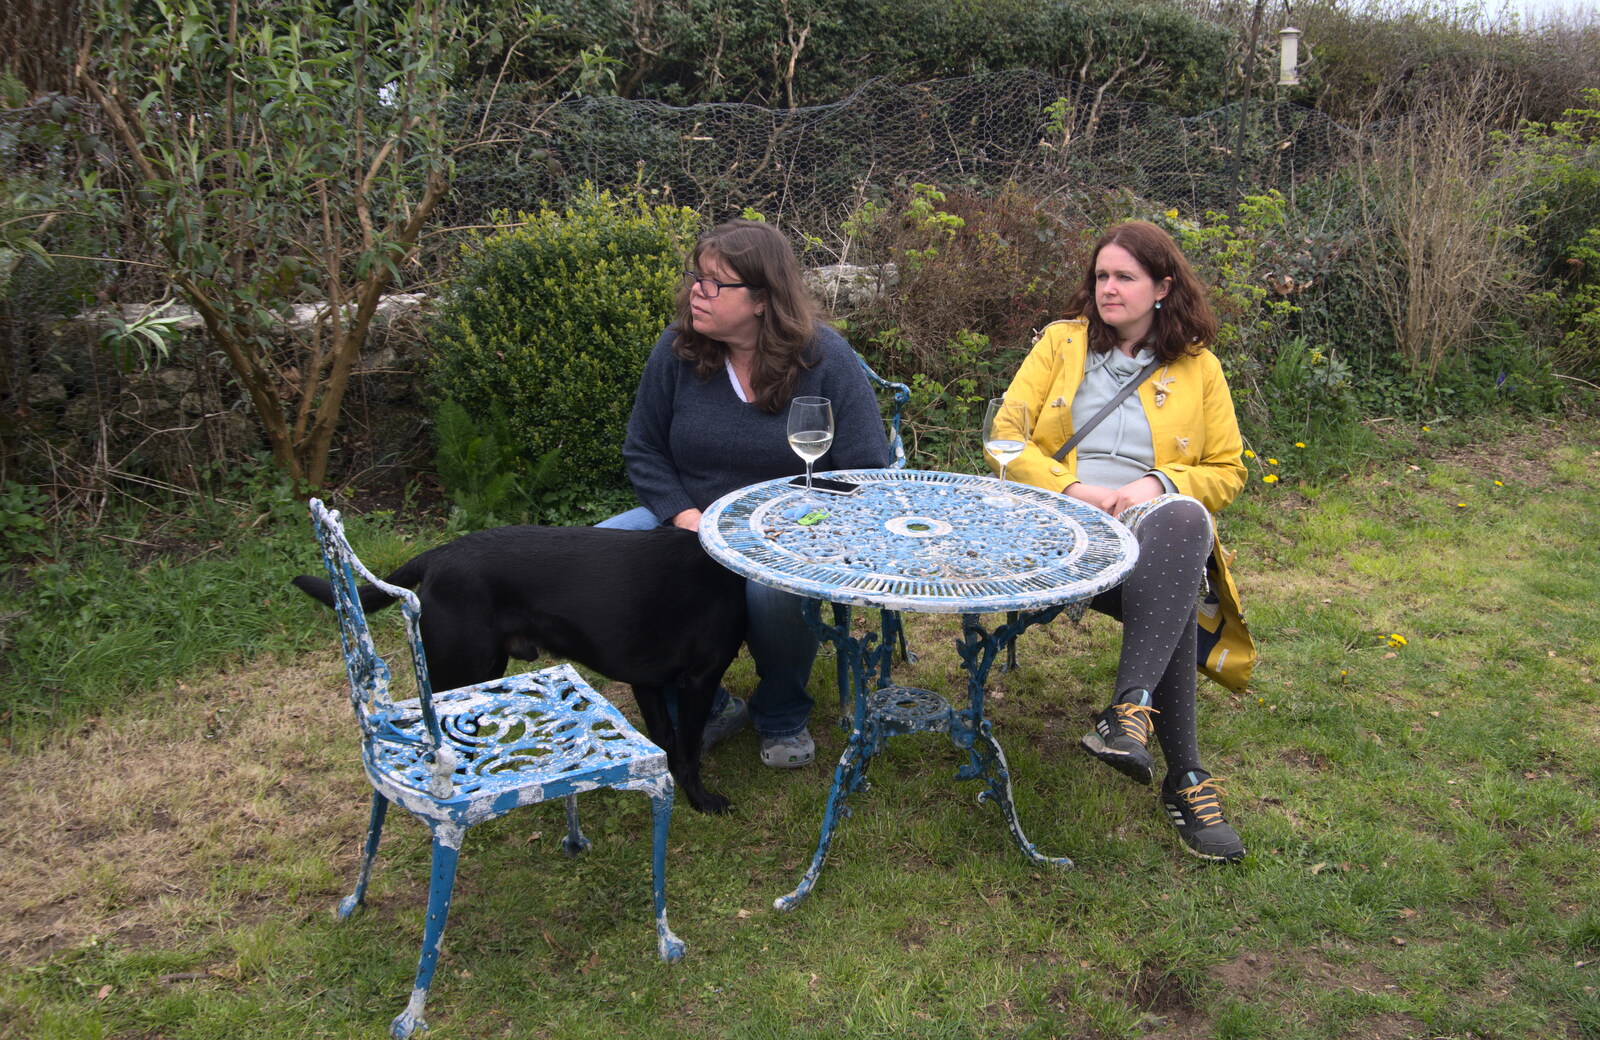 Sis and Isobel in the garden from Easter in South Zeal and Moretonhampstead, Devon - 9th April